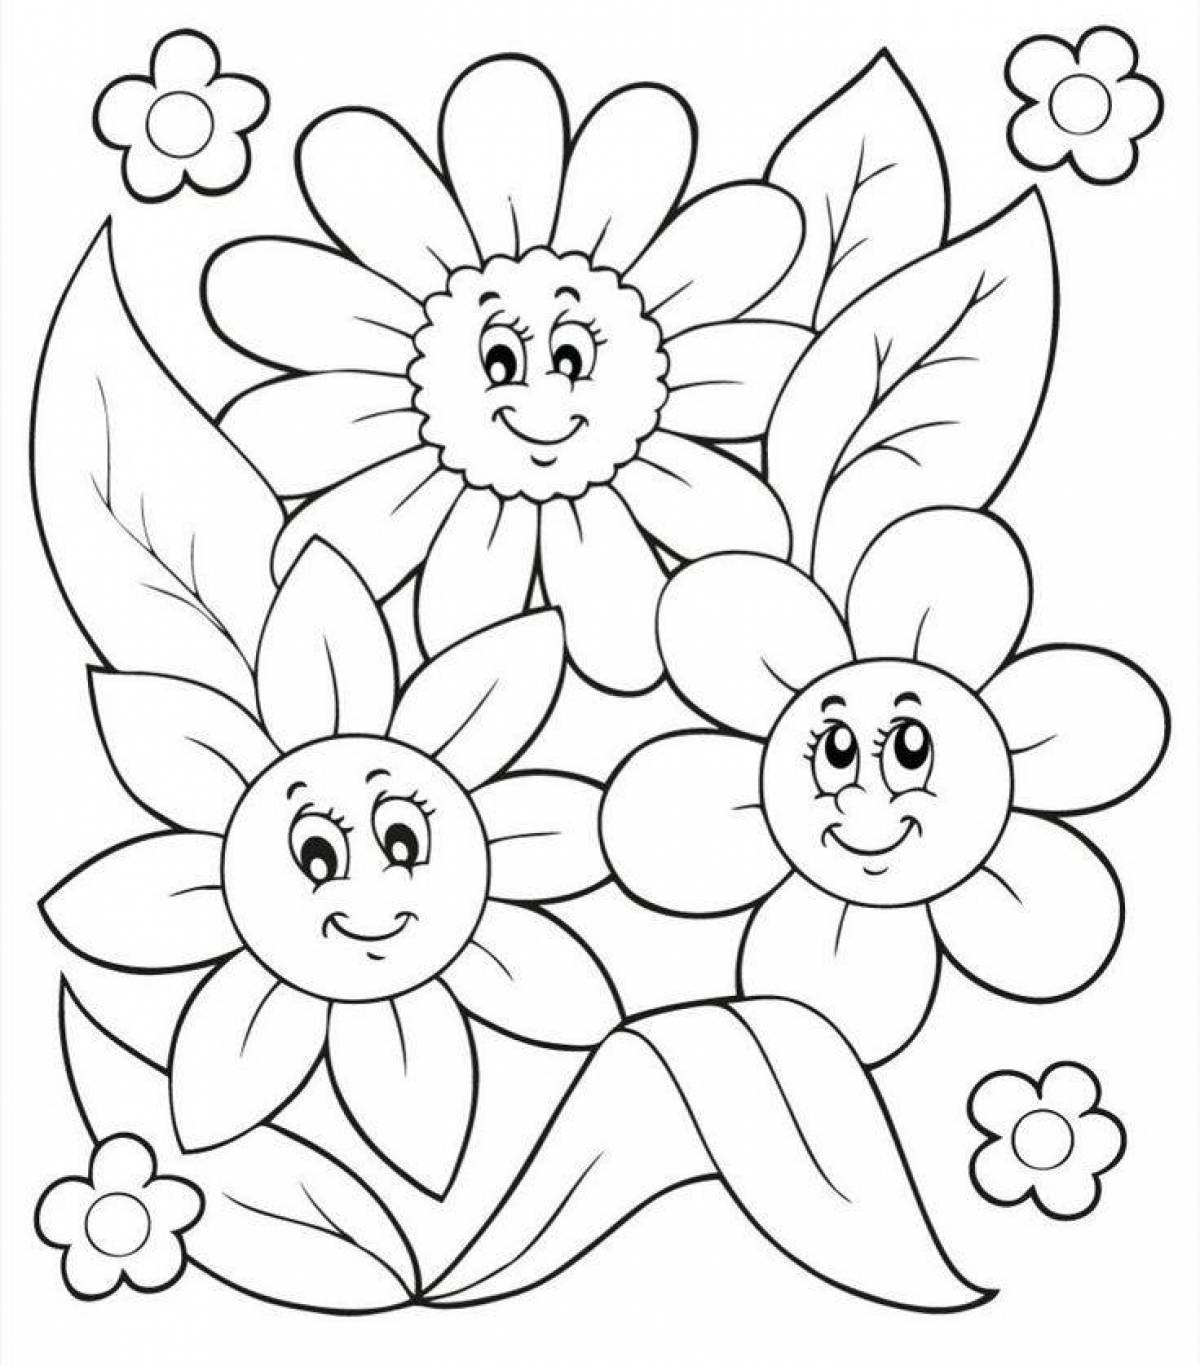 Fabulous flower coloring pages for 4-5 year olds